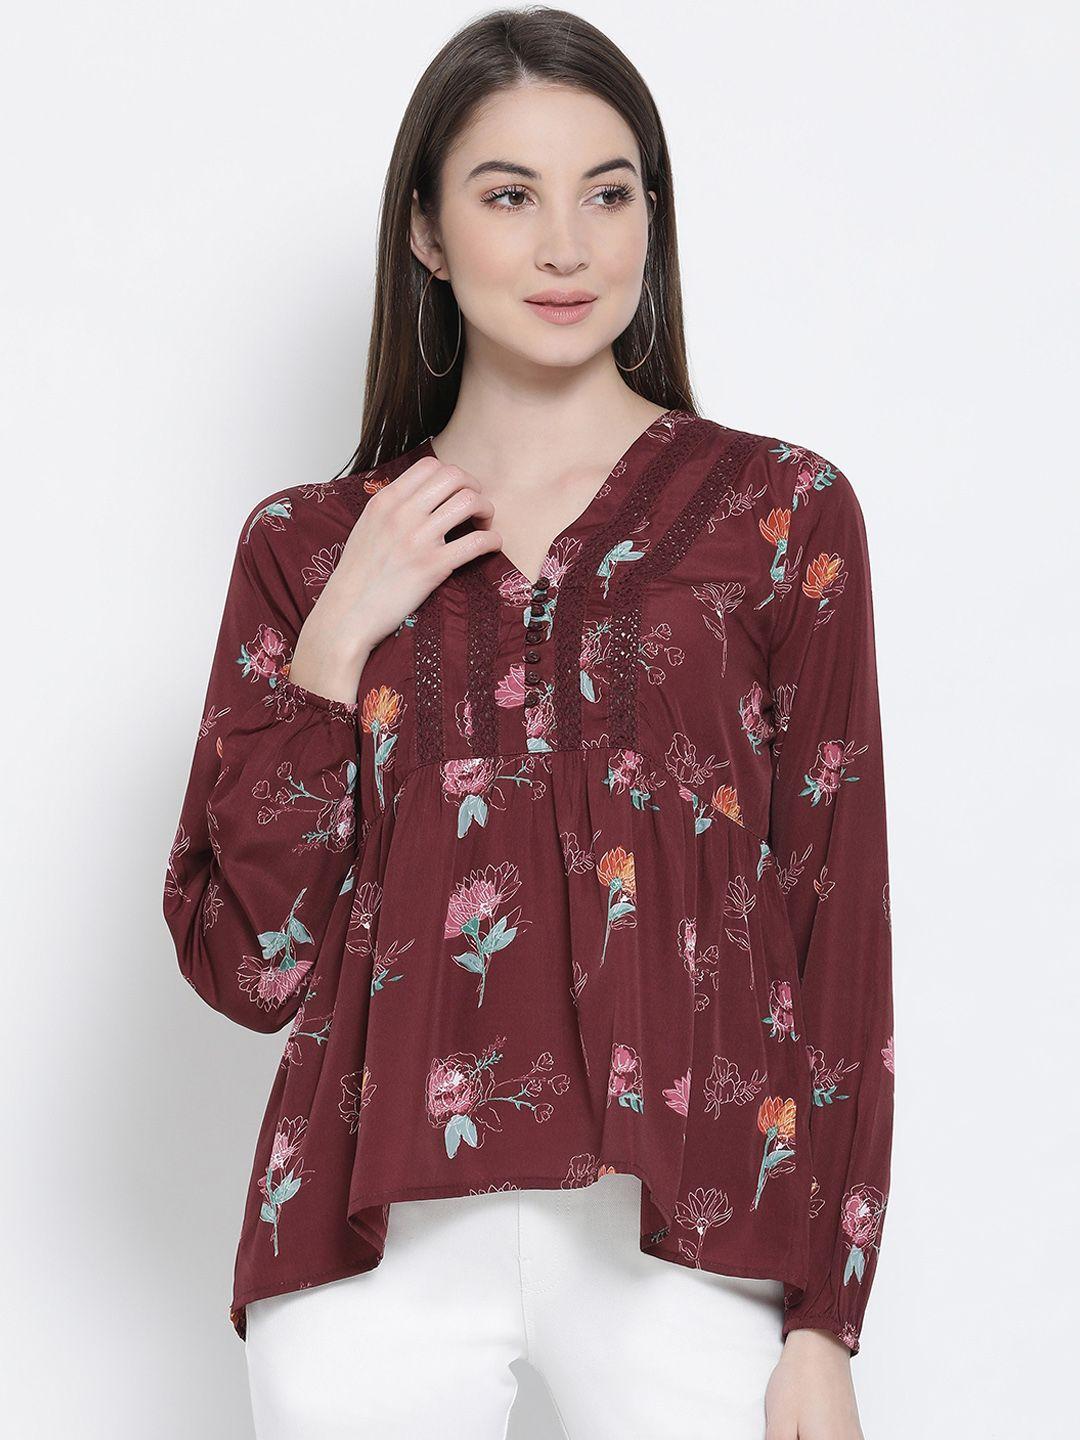 oxolloxo women maroon printed a-line top